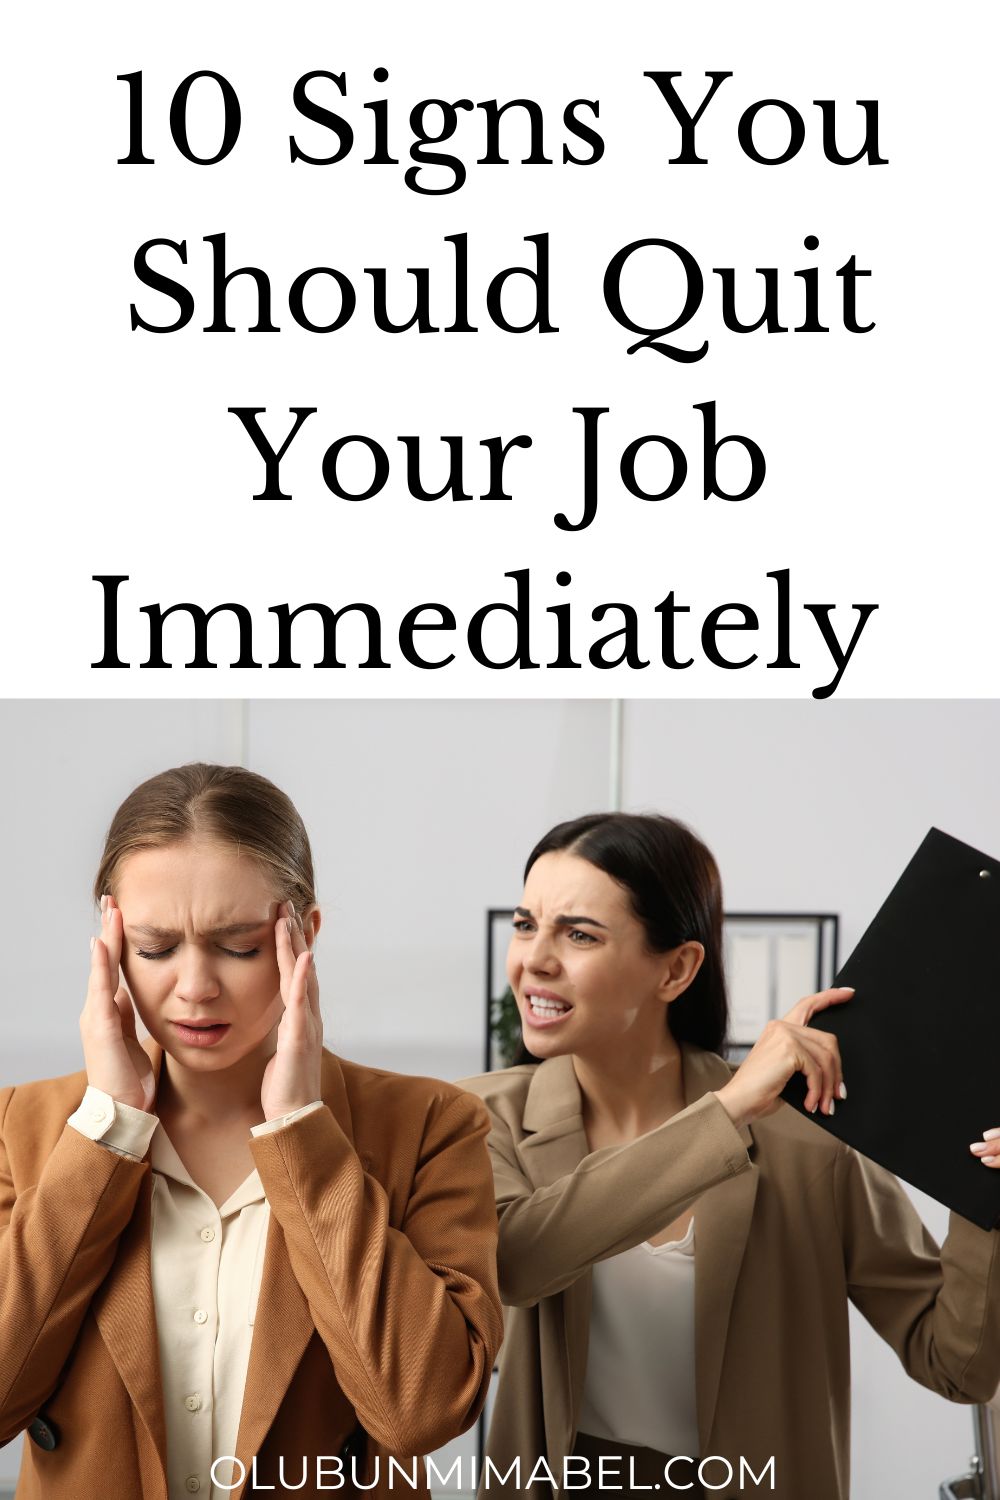 Signs You Should Quit Your Job Immediately